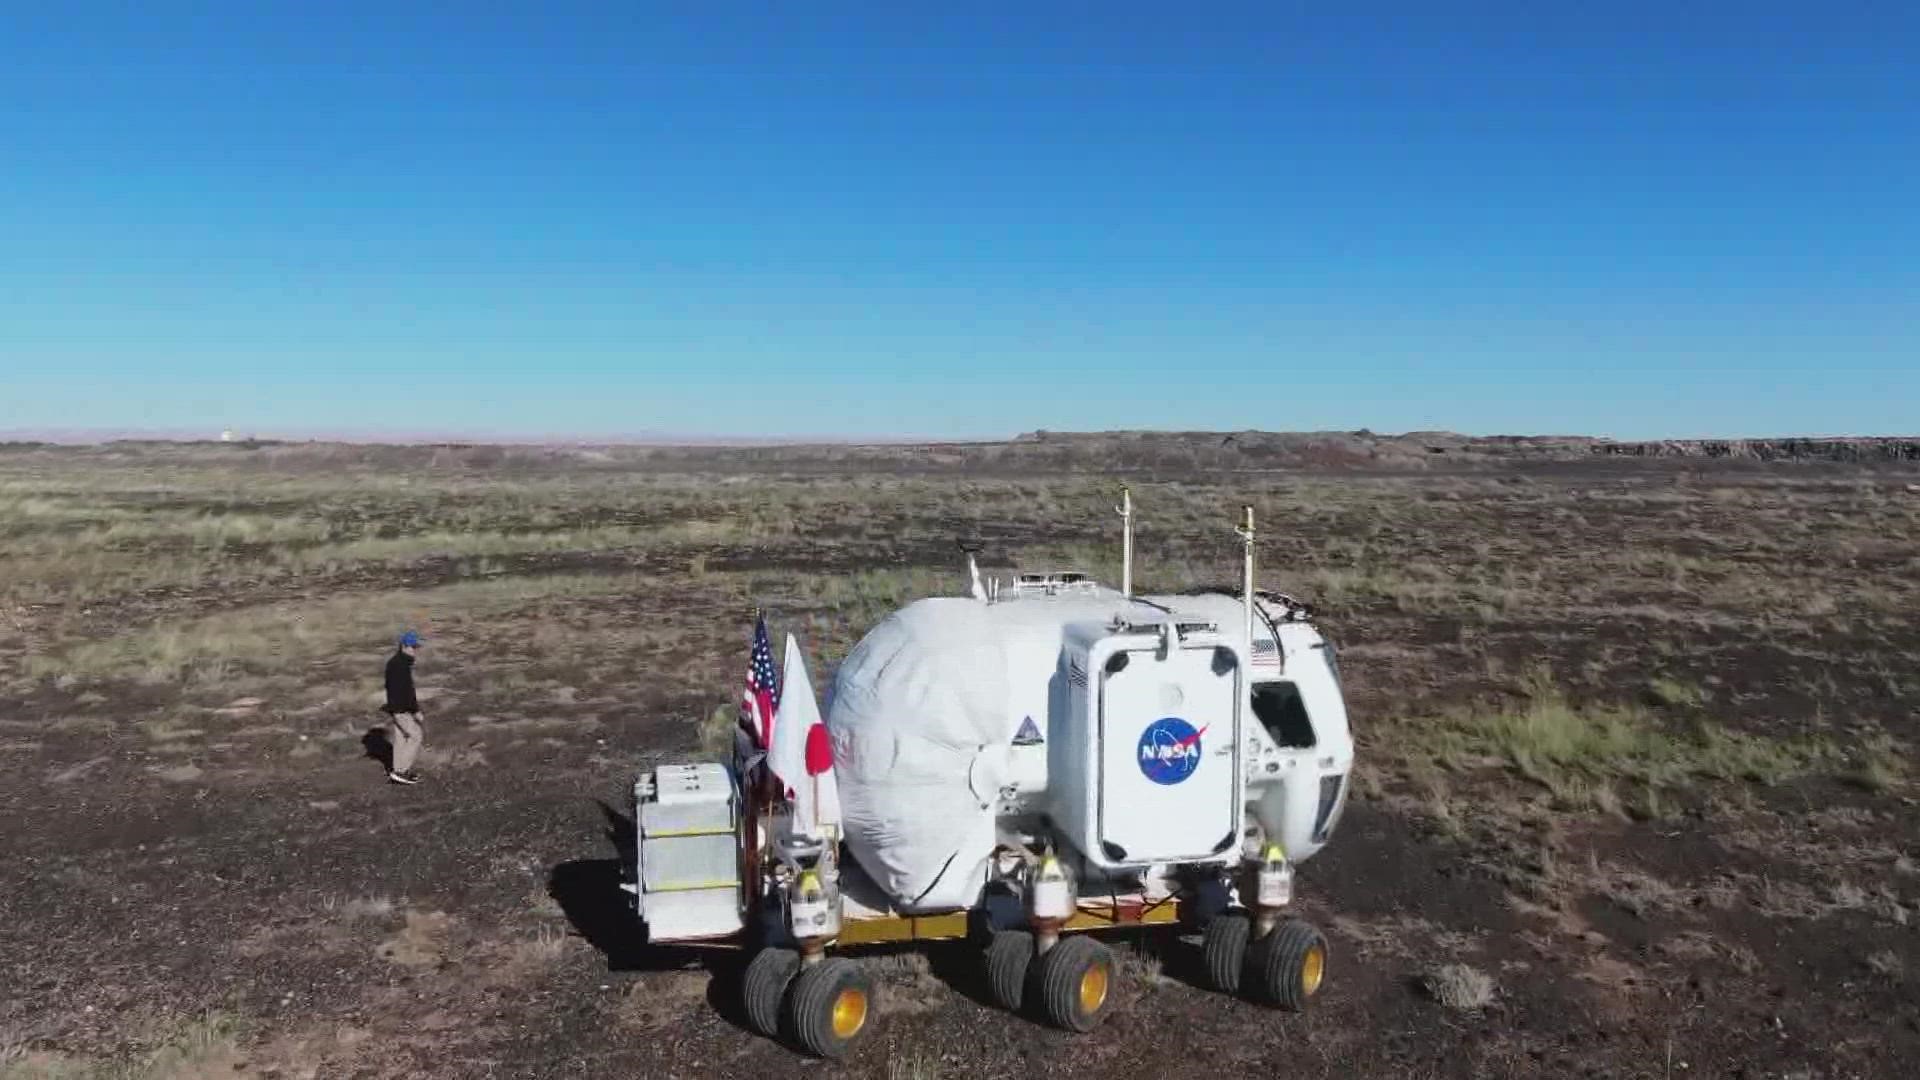 NASA has been testing a new moon rover in the rocky lava fields north of Flagstaff.